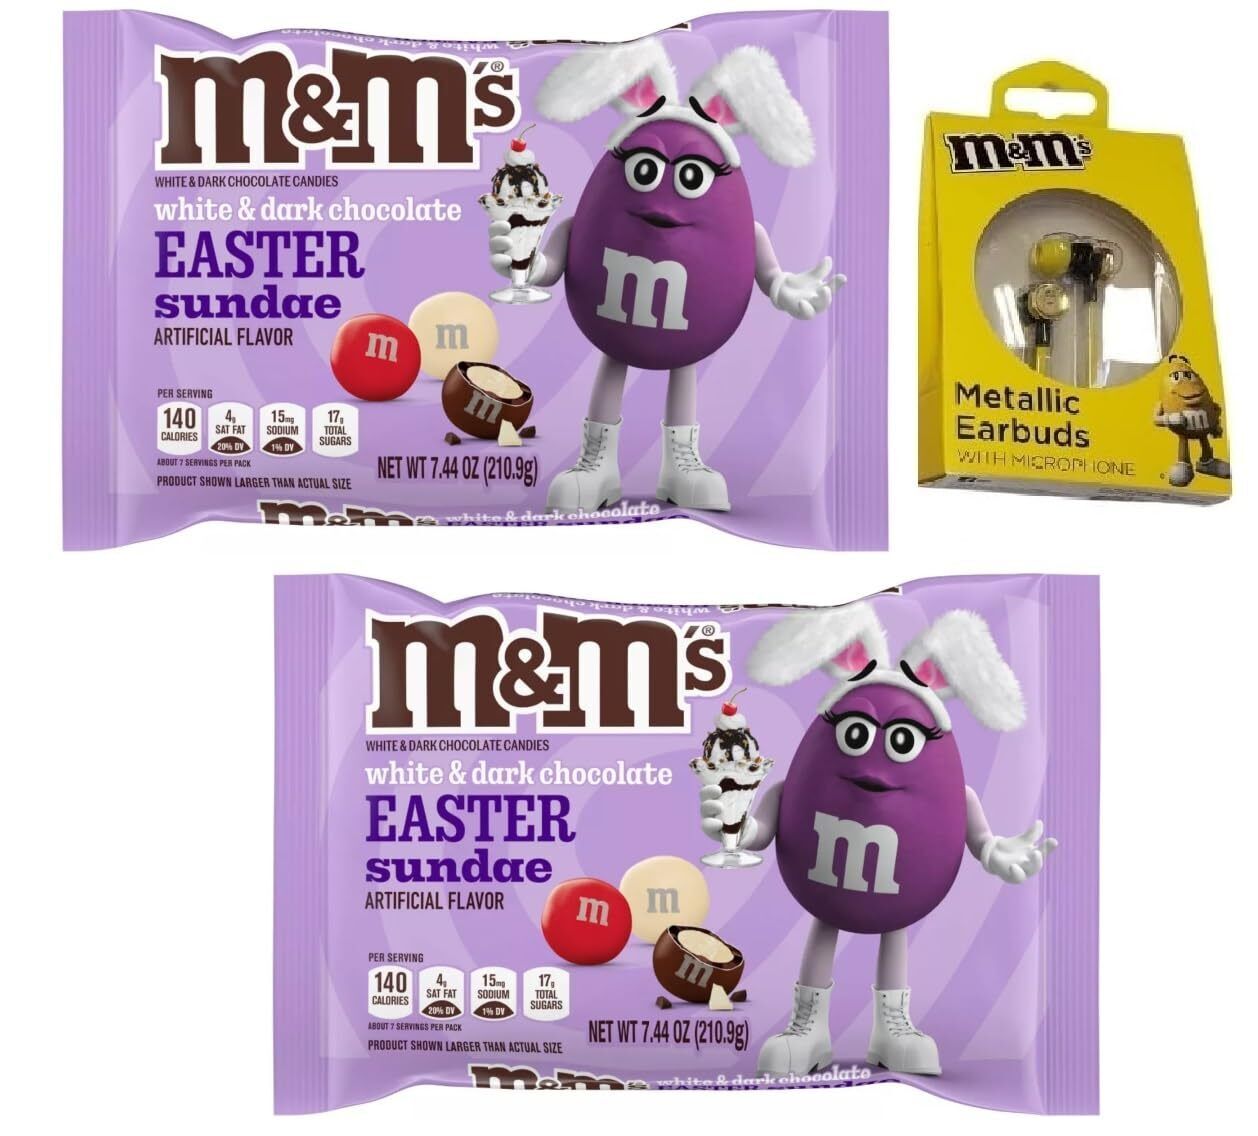 Limited Edition M&Ms Candy and Earbuds Bundle (Easter Sundae)